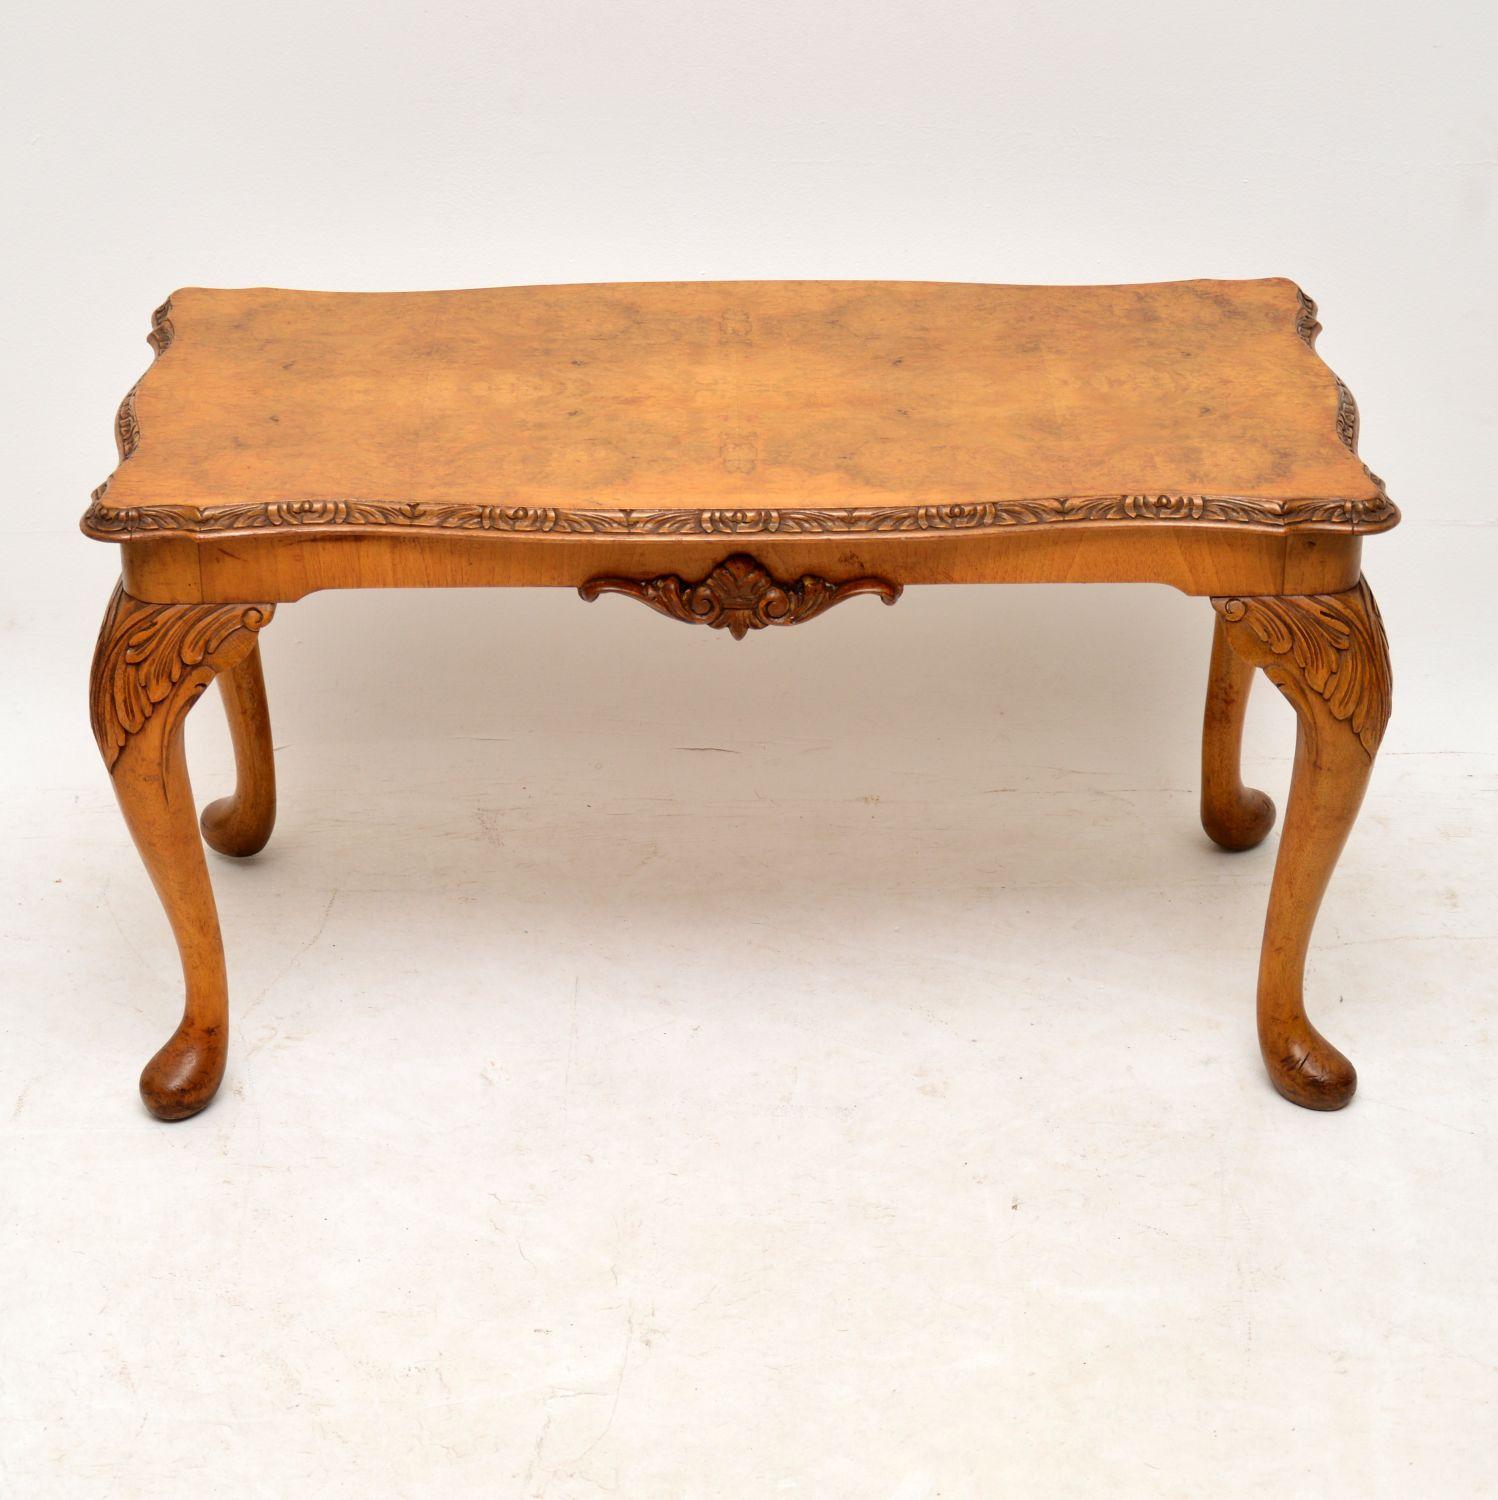 This antique Queen Anne style walnut coffee table has a lovely mellow color and is in good original condition. It dates to circa 1930s period and has just been French polished. The shaped top is burr walnut and there are carvings on the top edge,